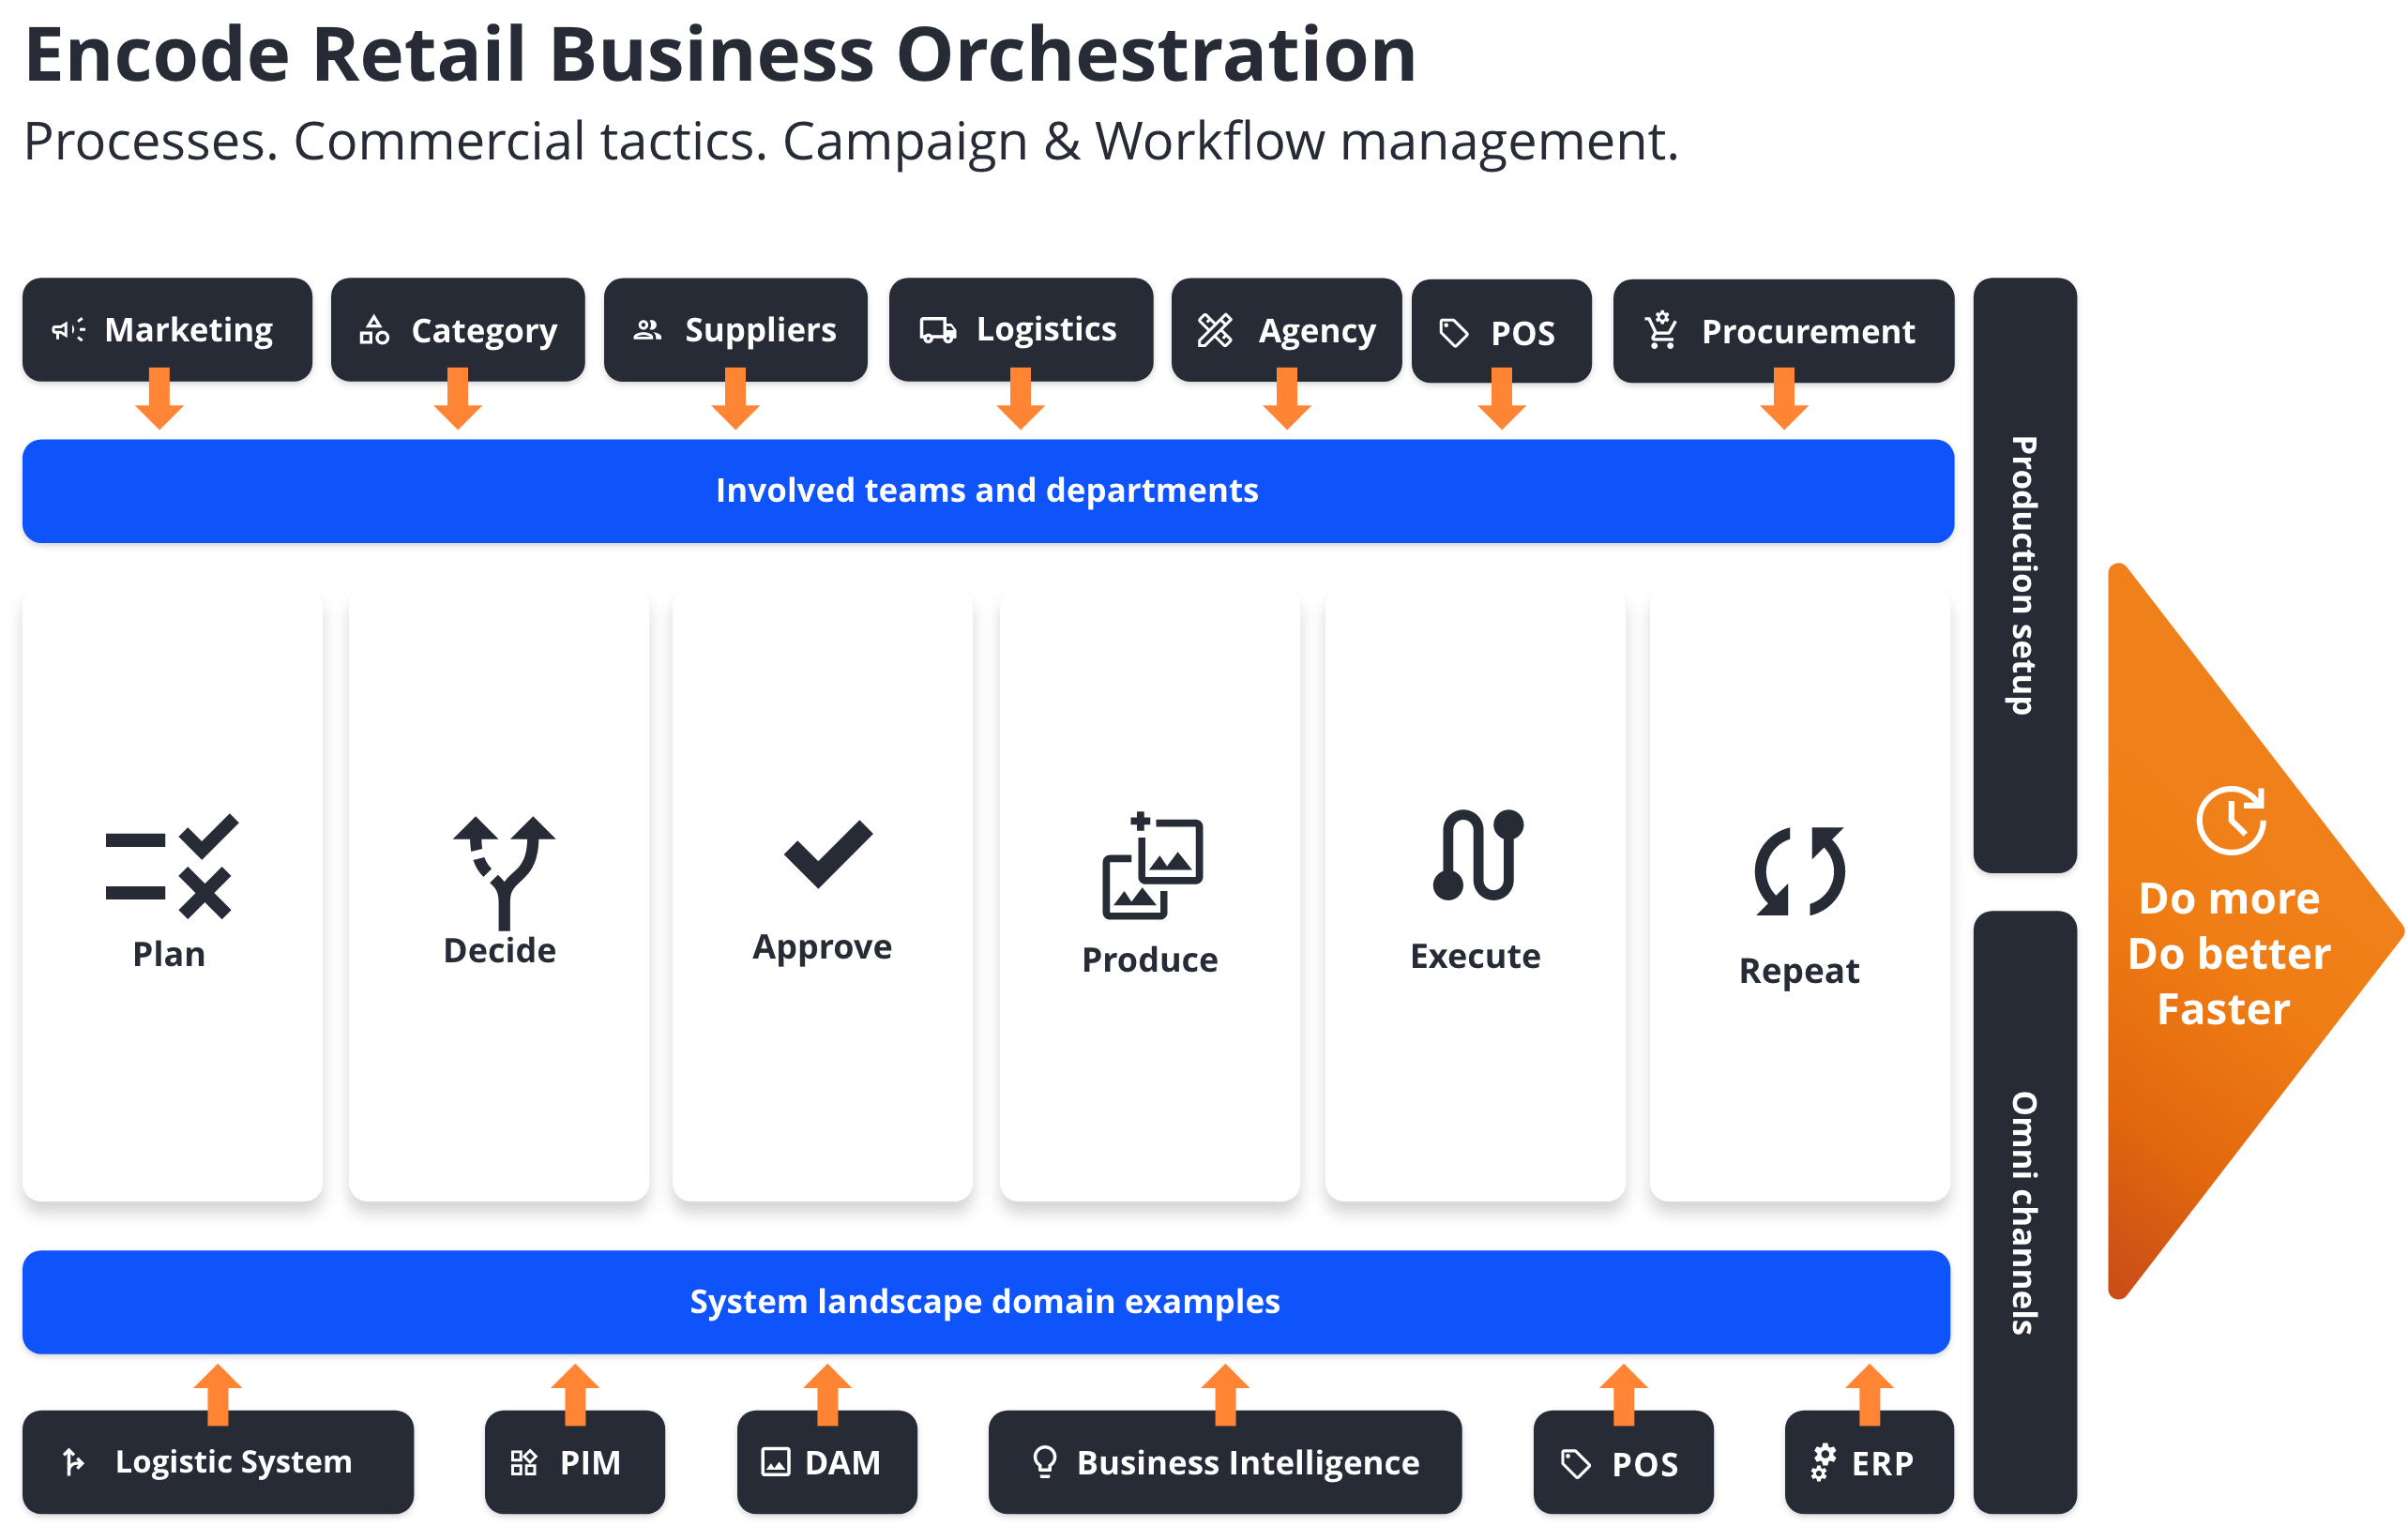 Encode retail Business Orchestration